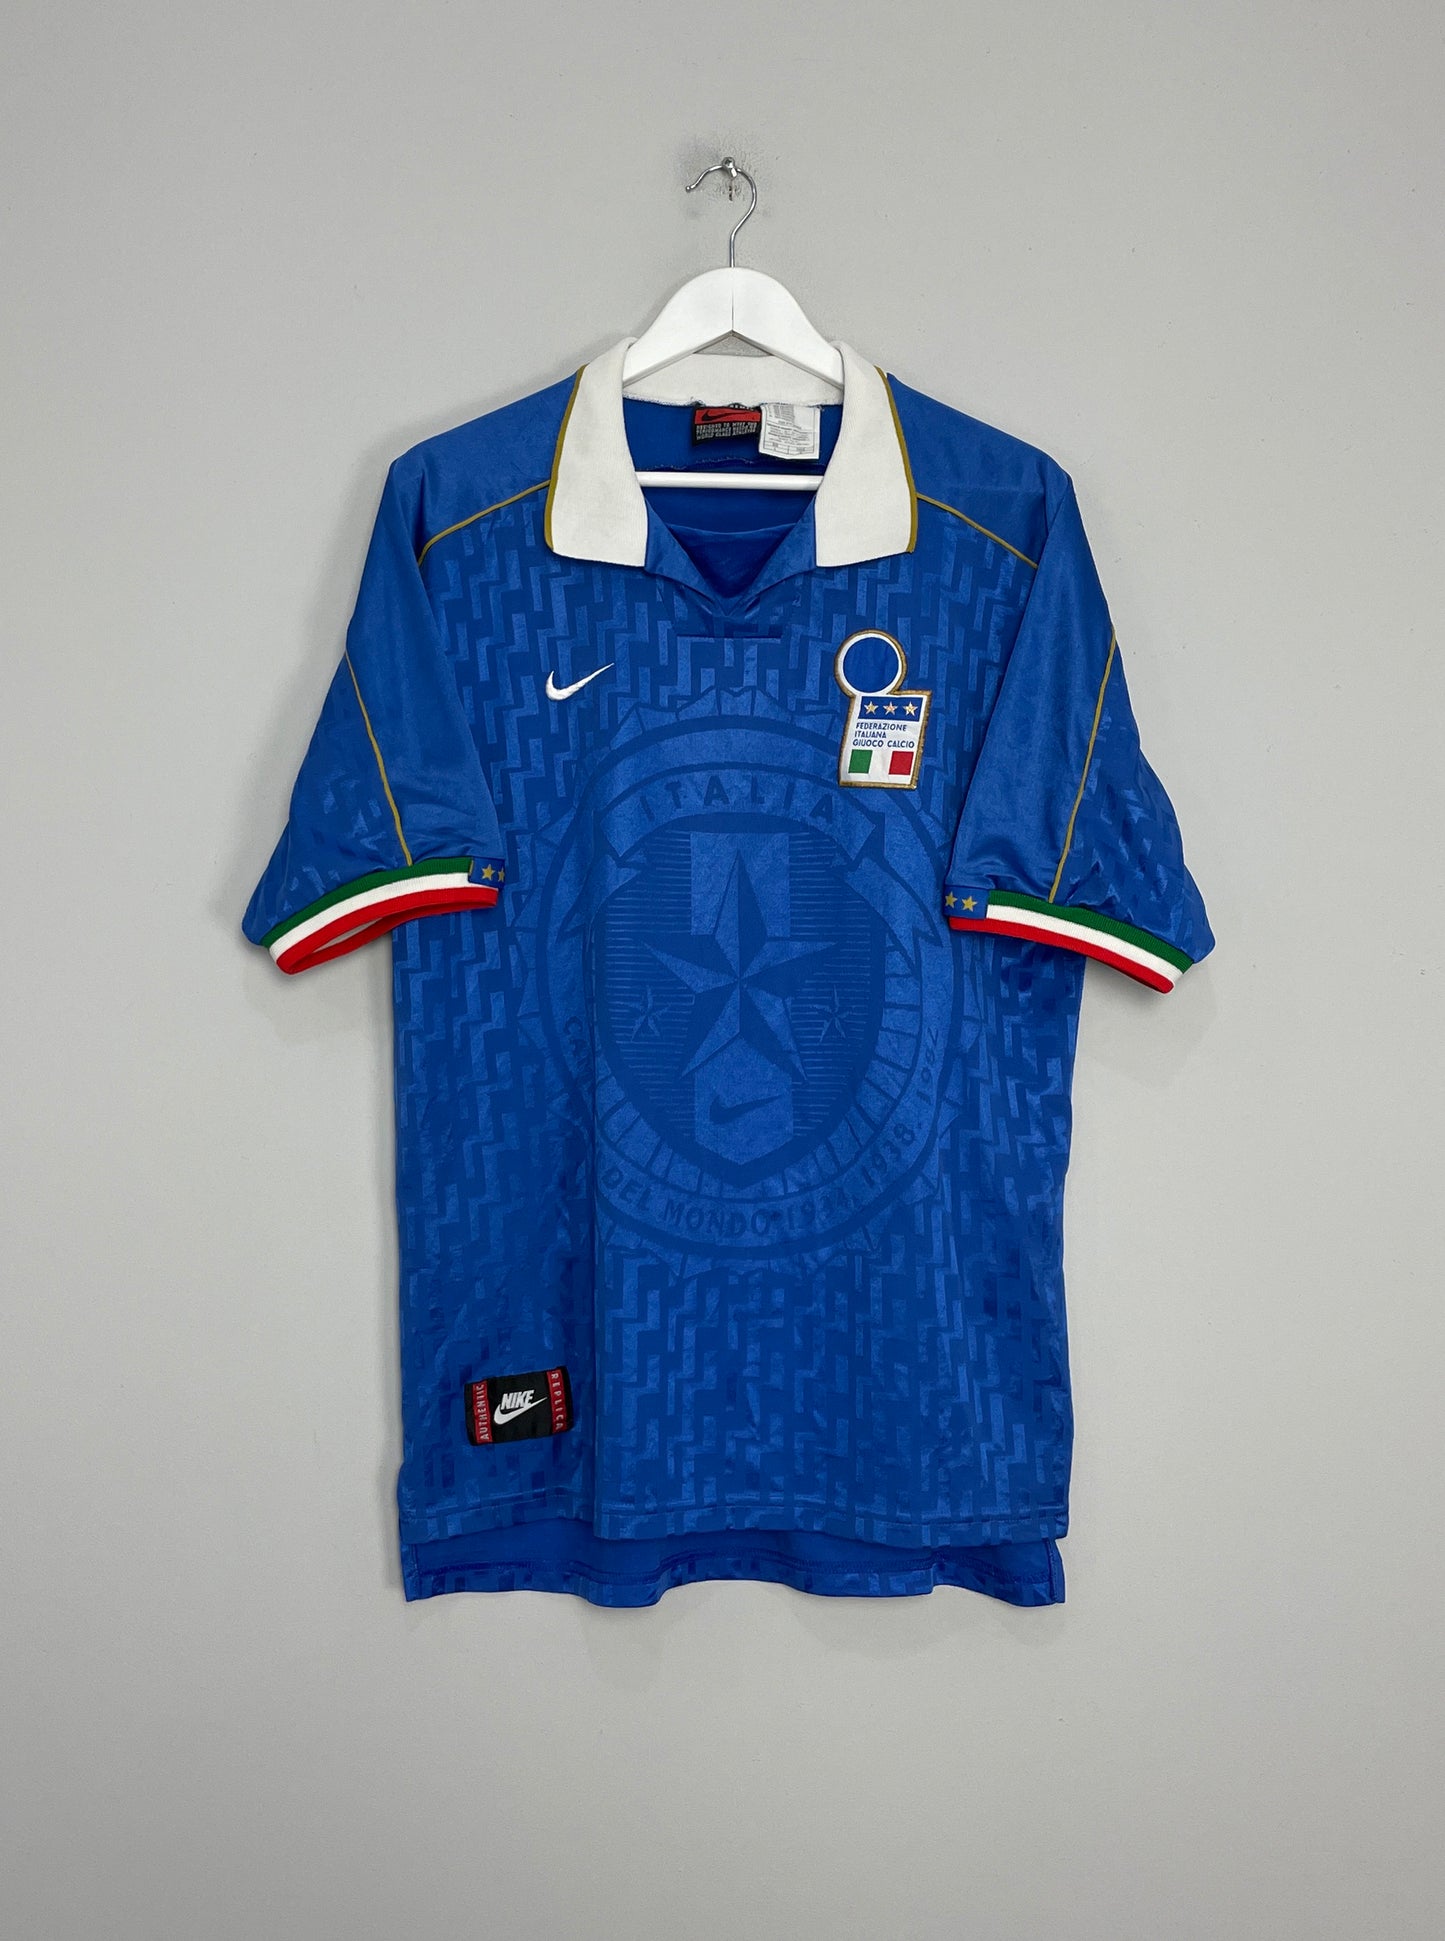 Image of the Italy shirt from the 1995/96 season